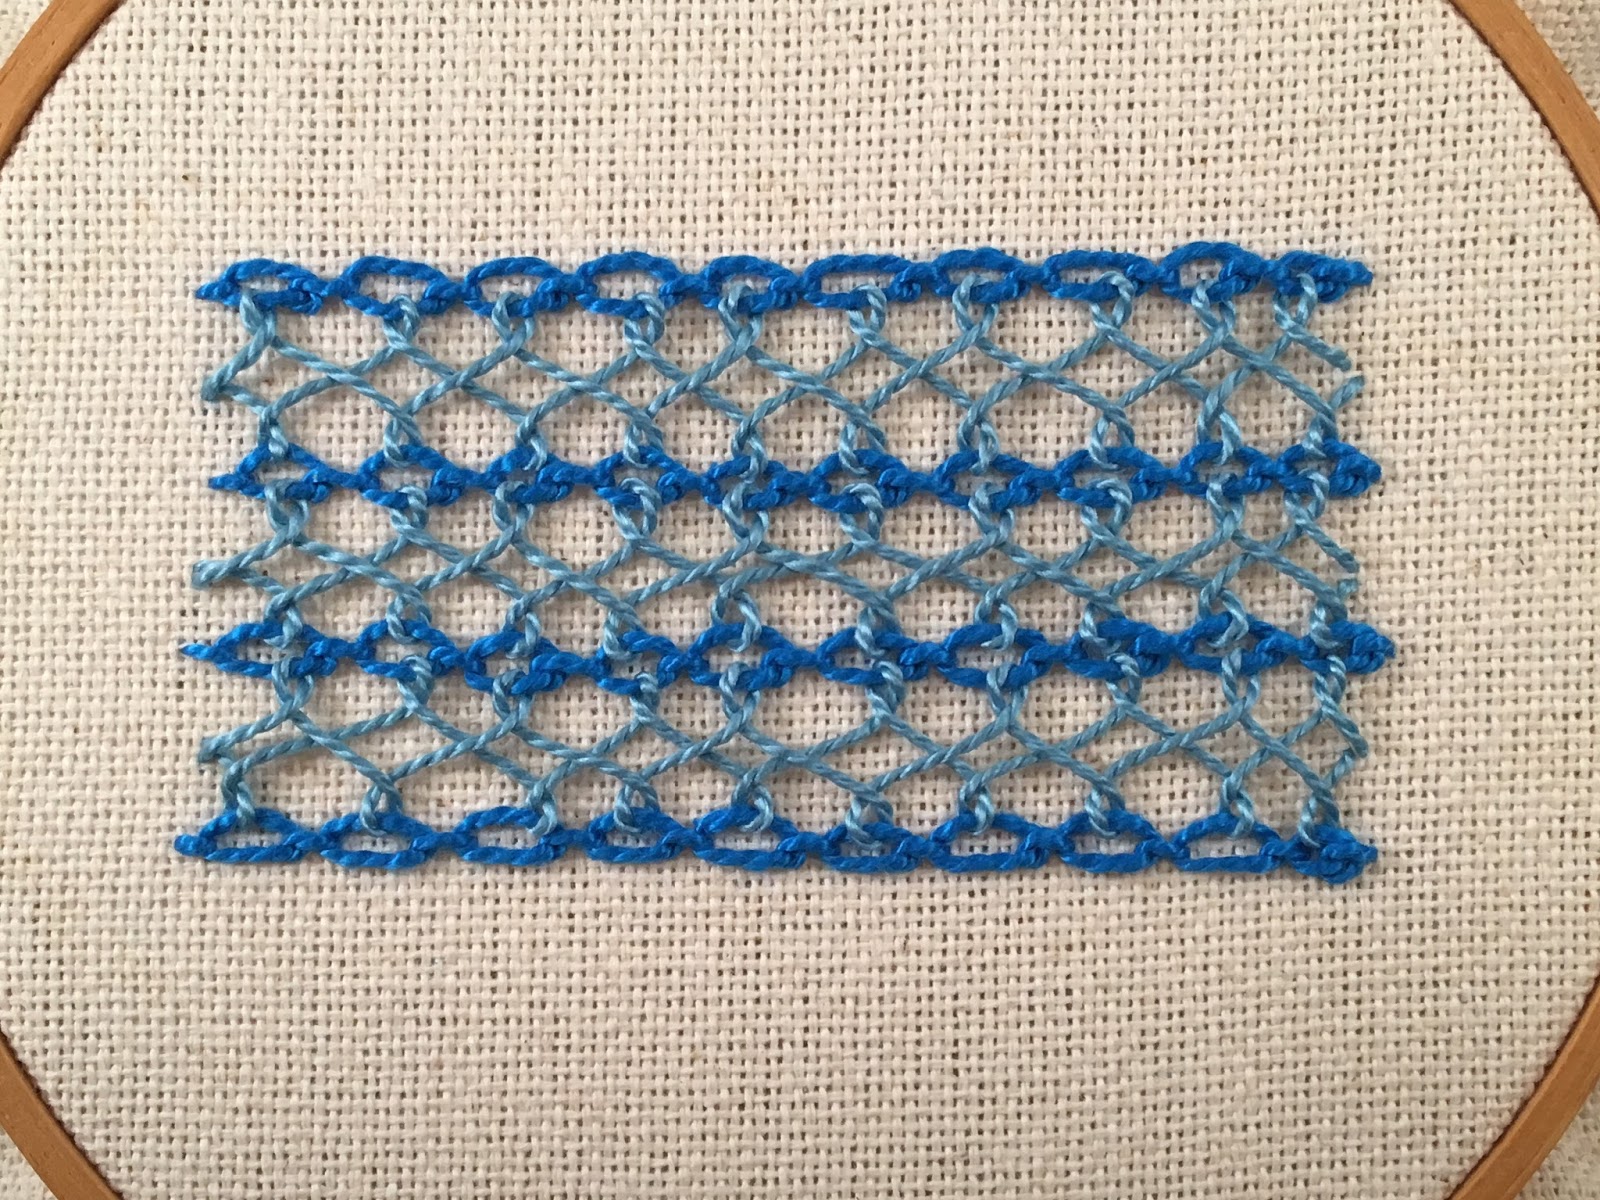 Interlaced Cable Chain Stitch by Michelle for Mooshiestitch Monday on Feeling Stitchy